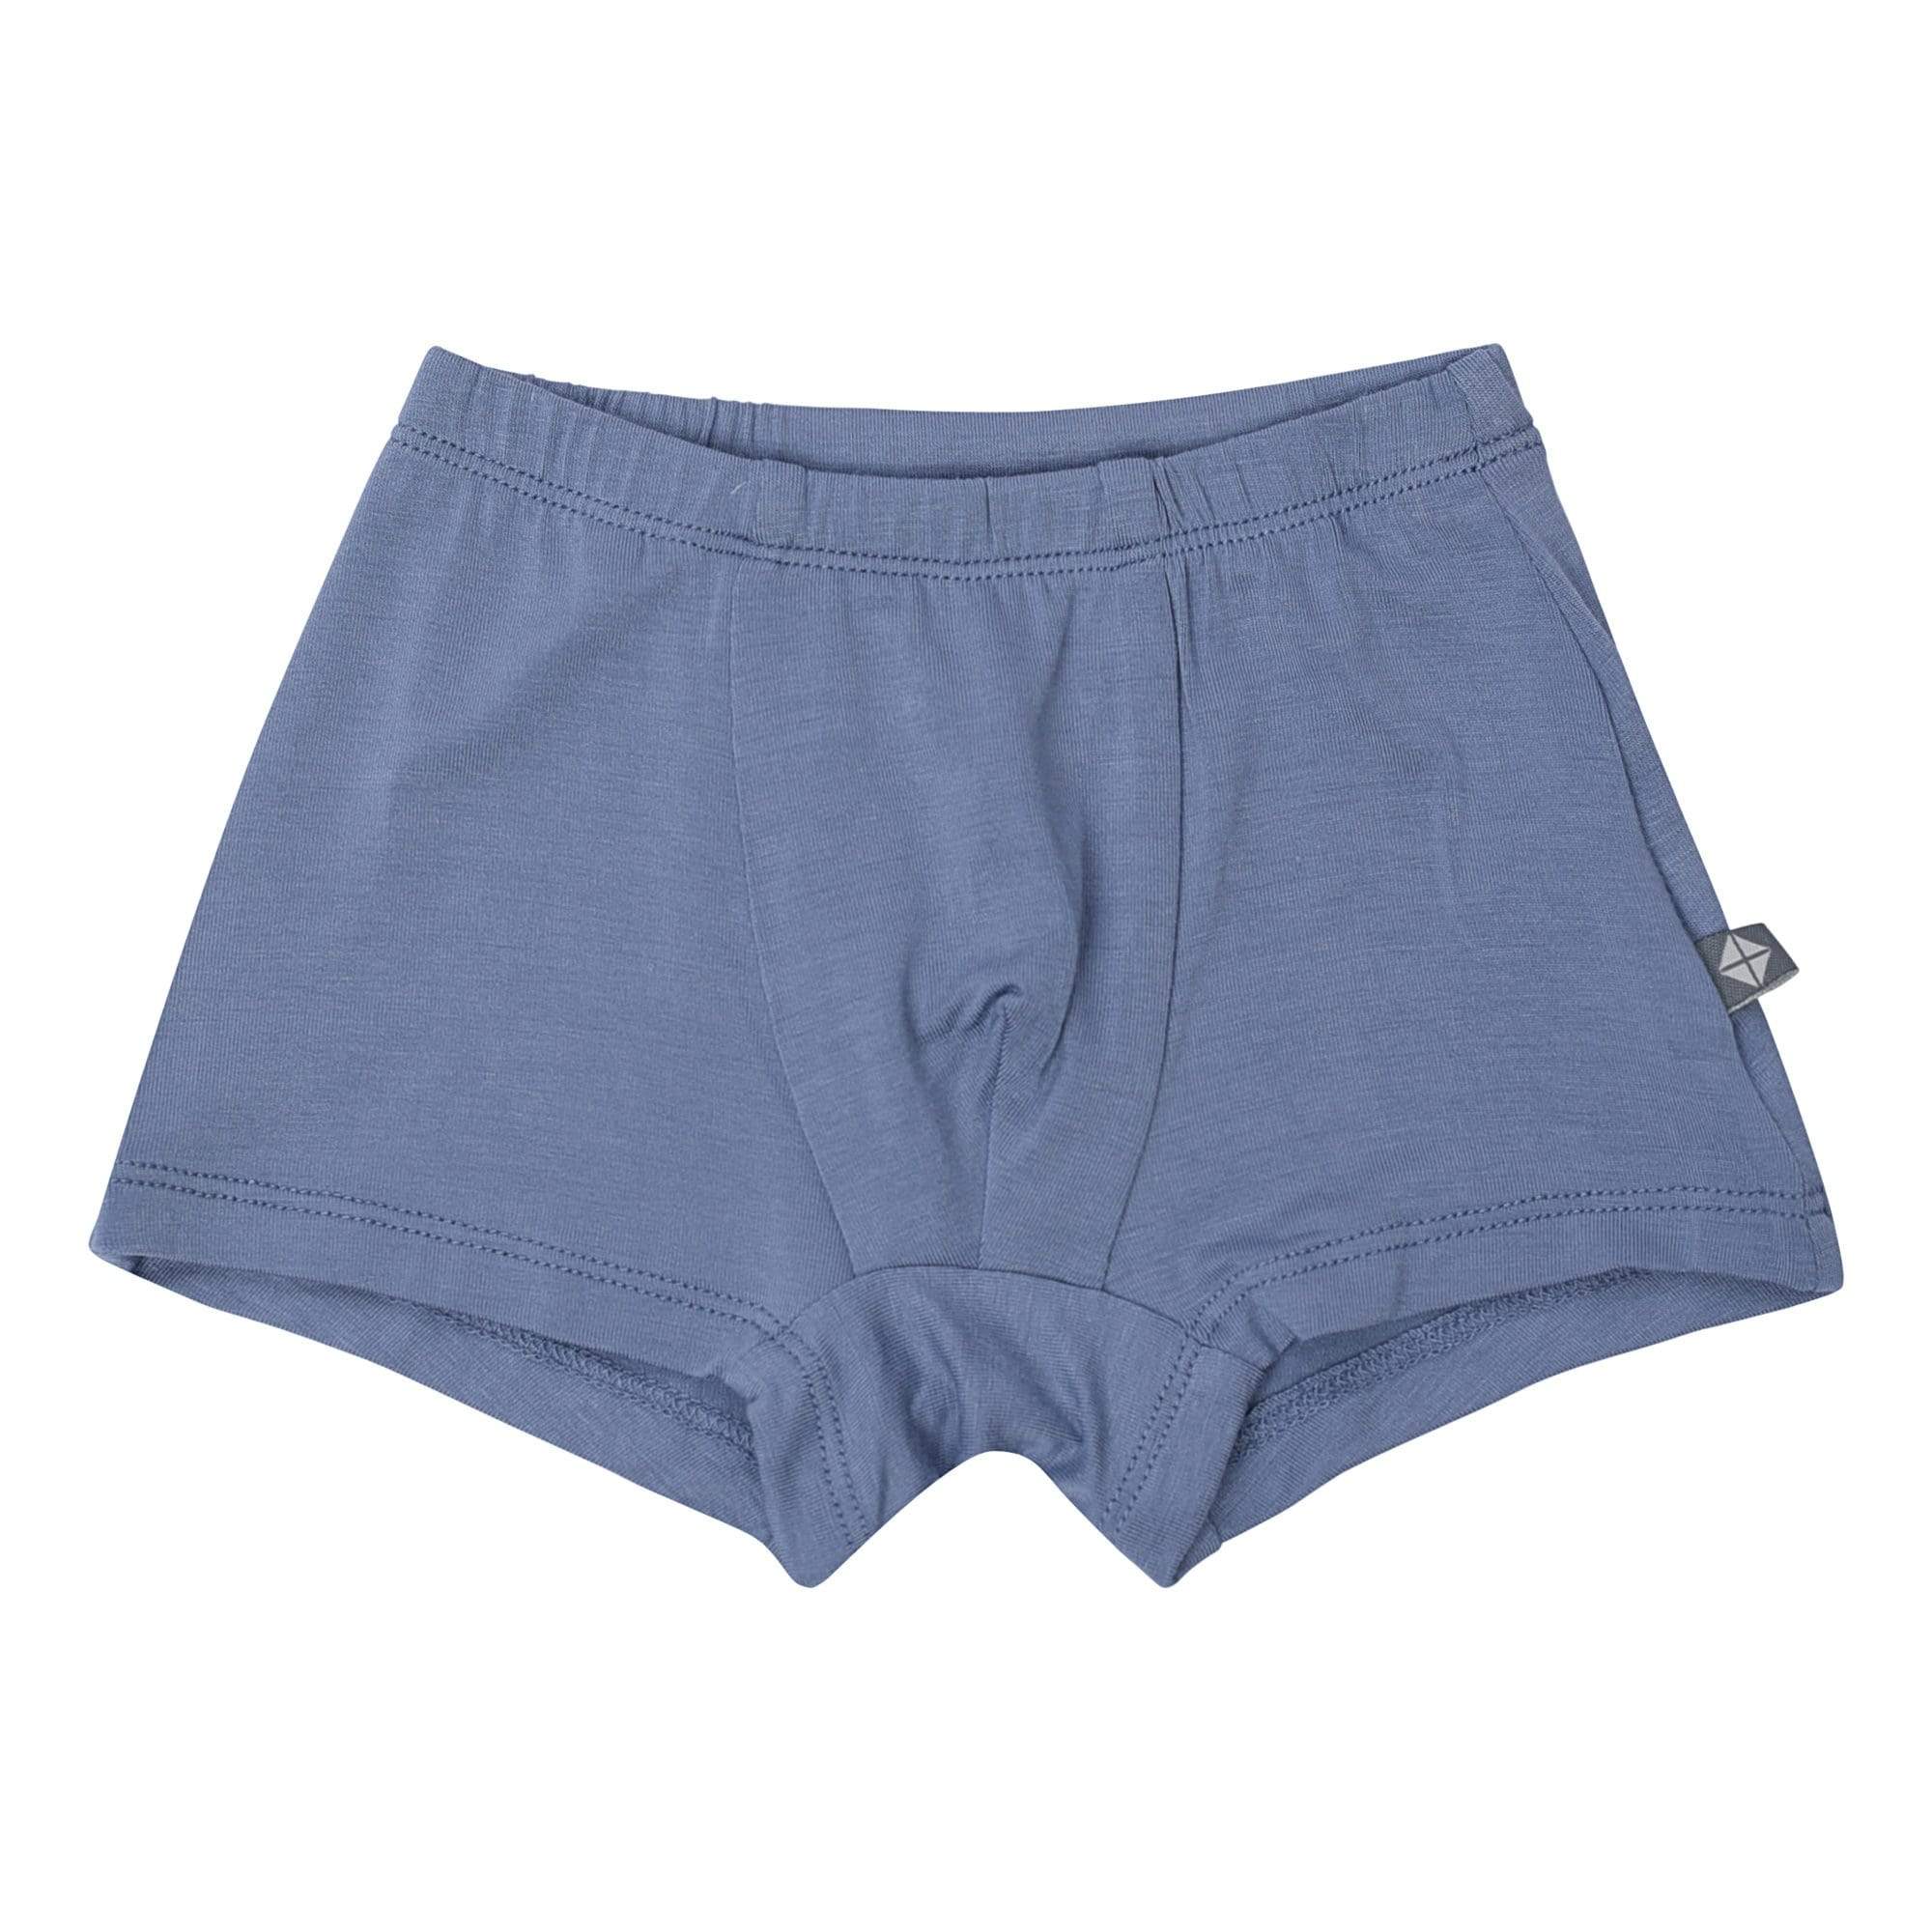 Bamboo Boys Briefs (blue/flint/sand) - Vancouver's Best Baby